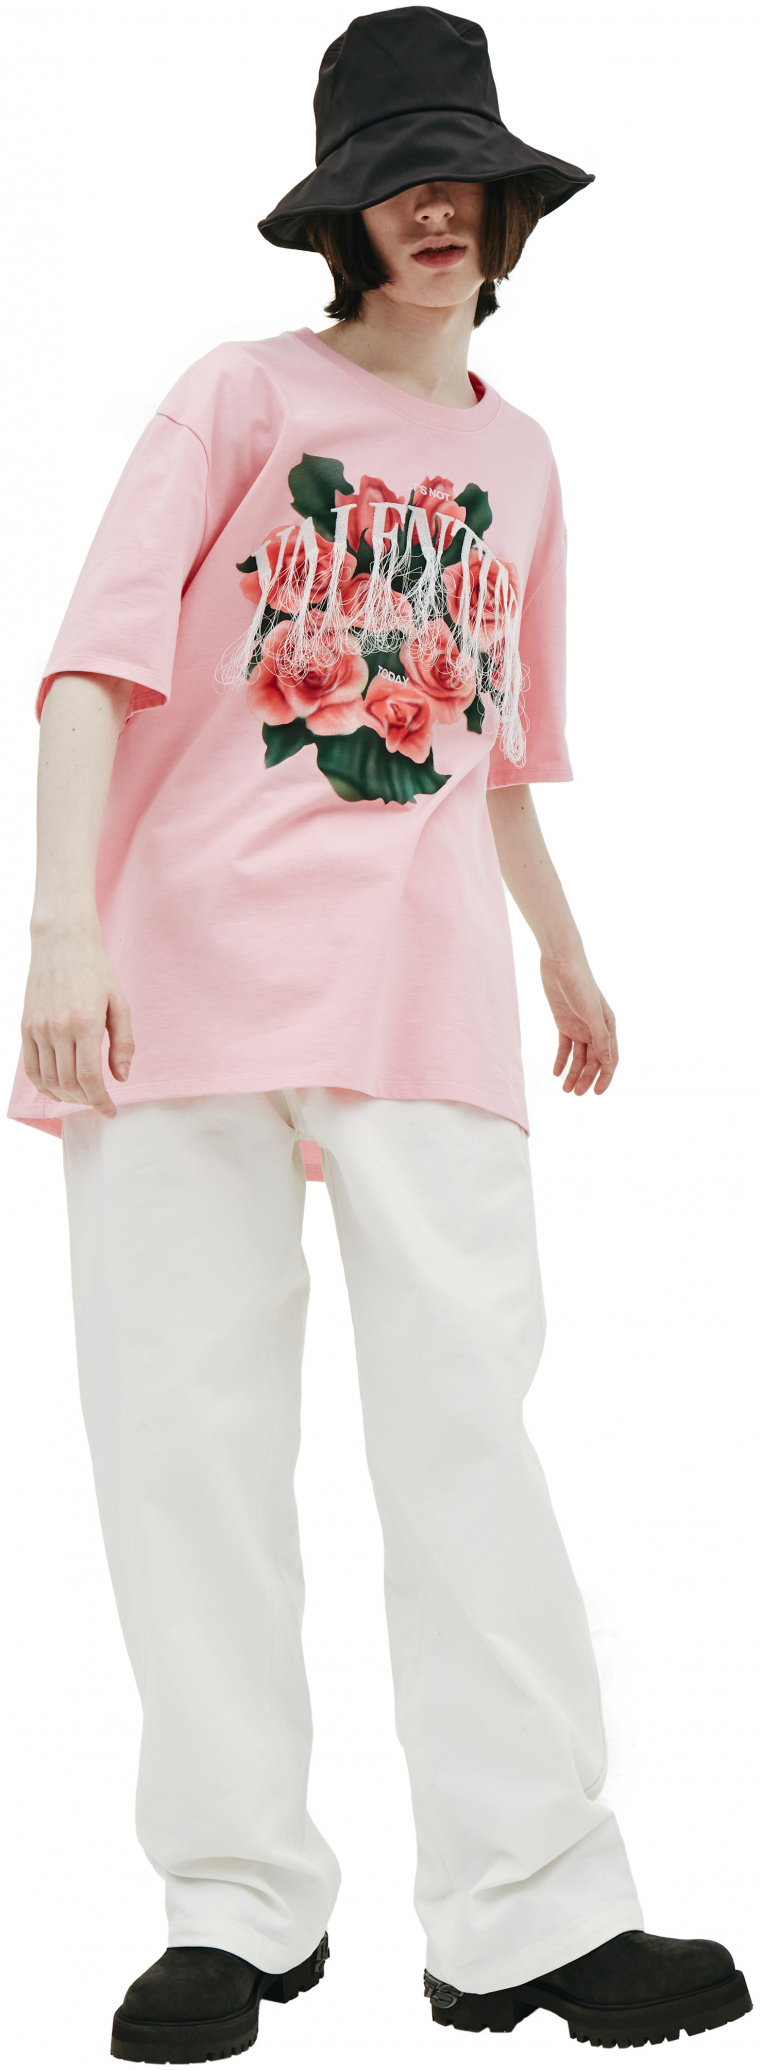 Doublet Embroidered Valentine T-shirt